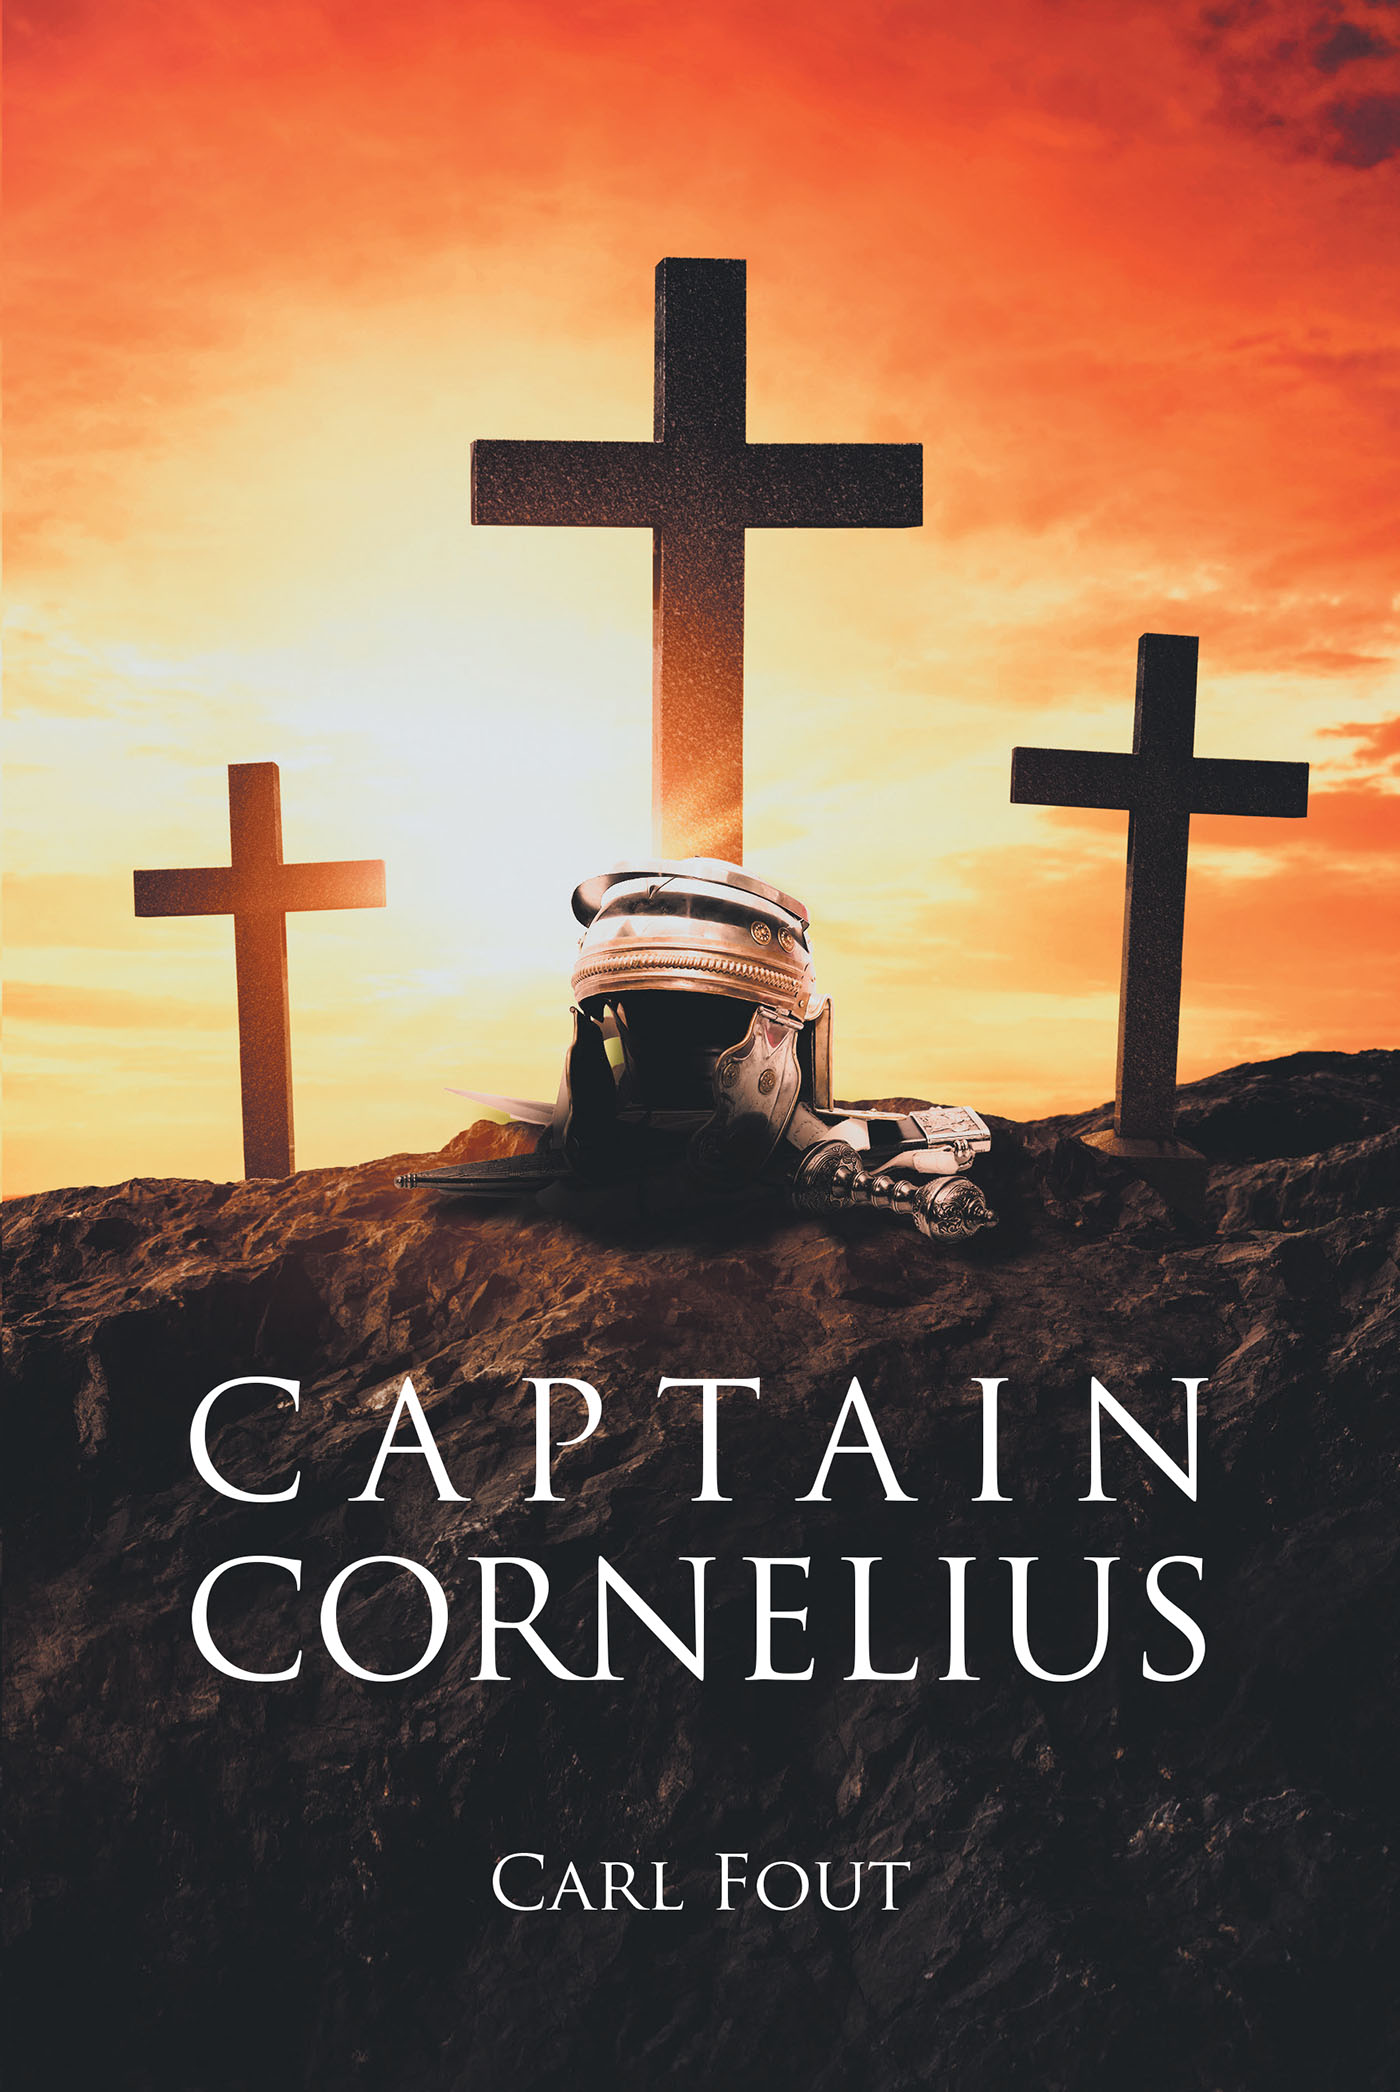 Carl Fout’s Newly Released "Captain Cornelius" is a Compelling Look Into the Life and Experiences of the Leader of the Romans During Christ’s Crucifixion